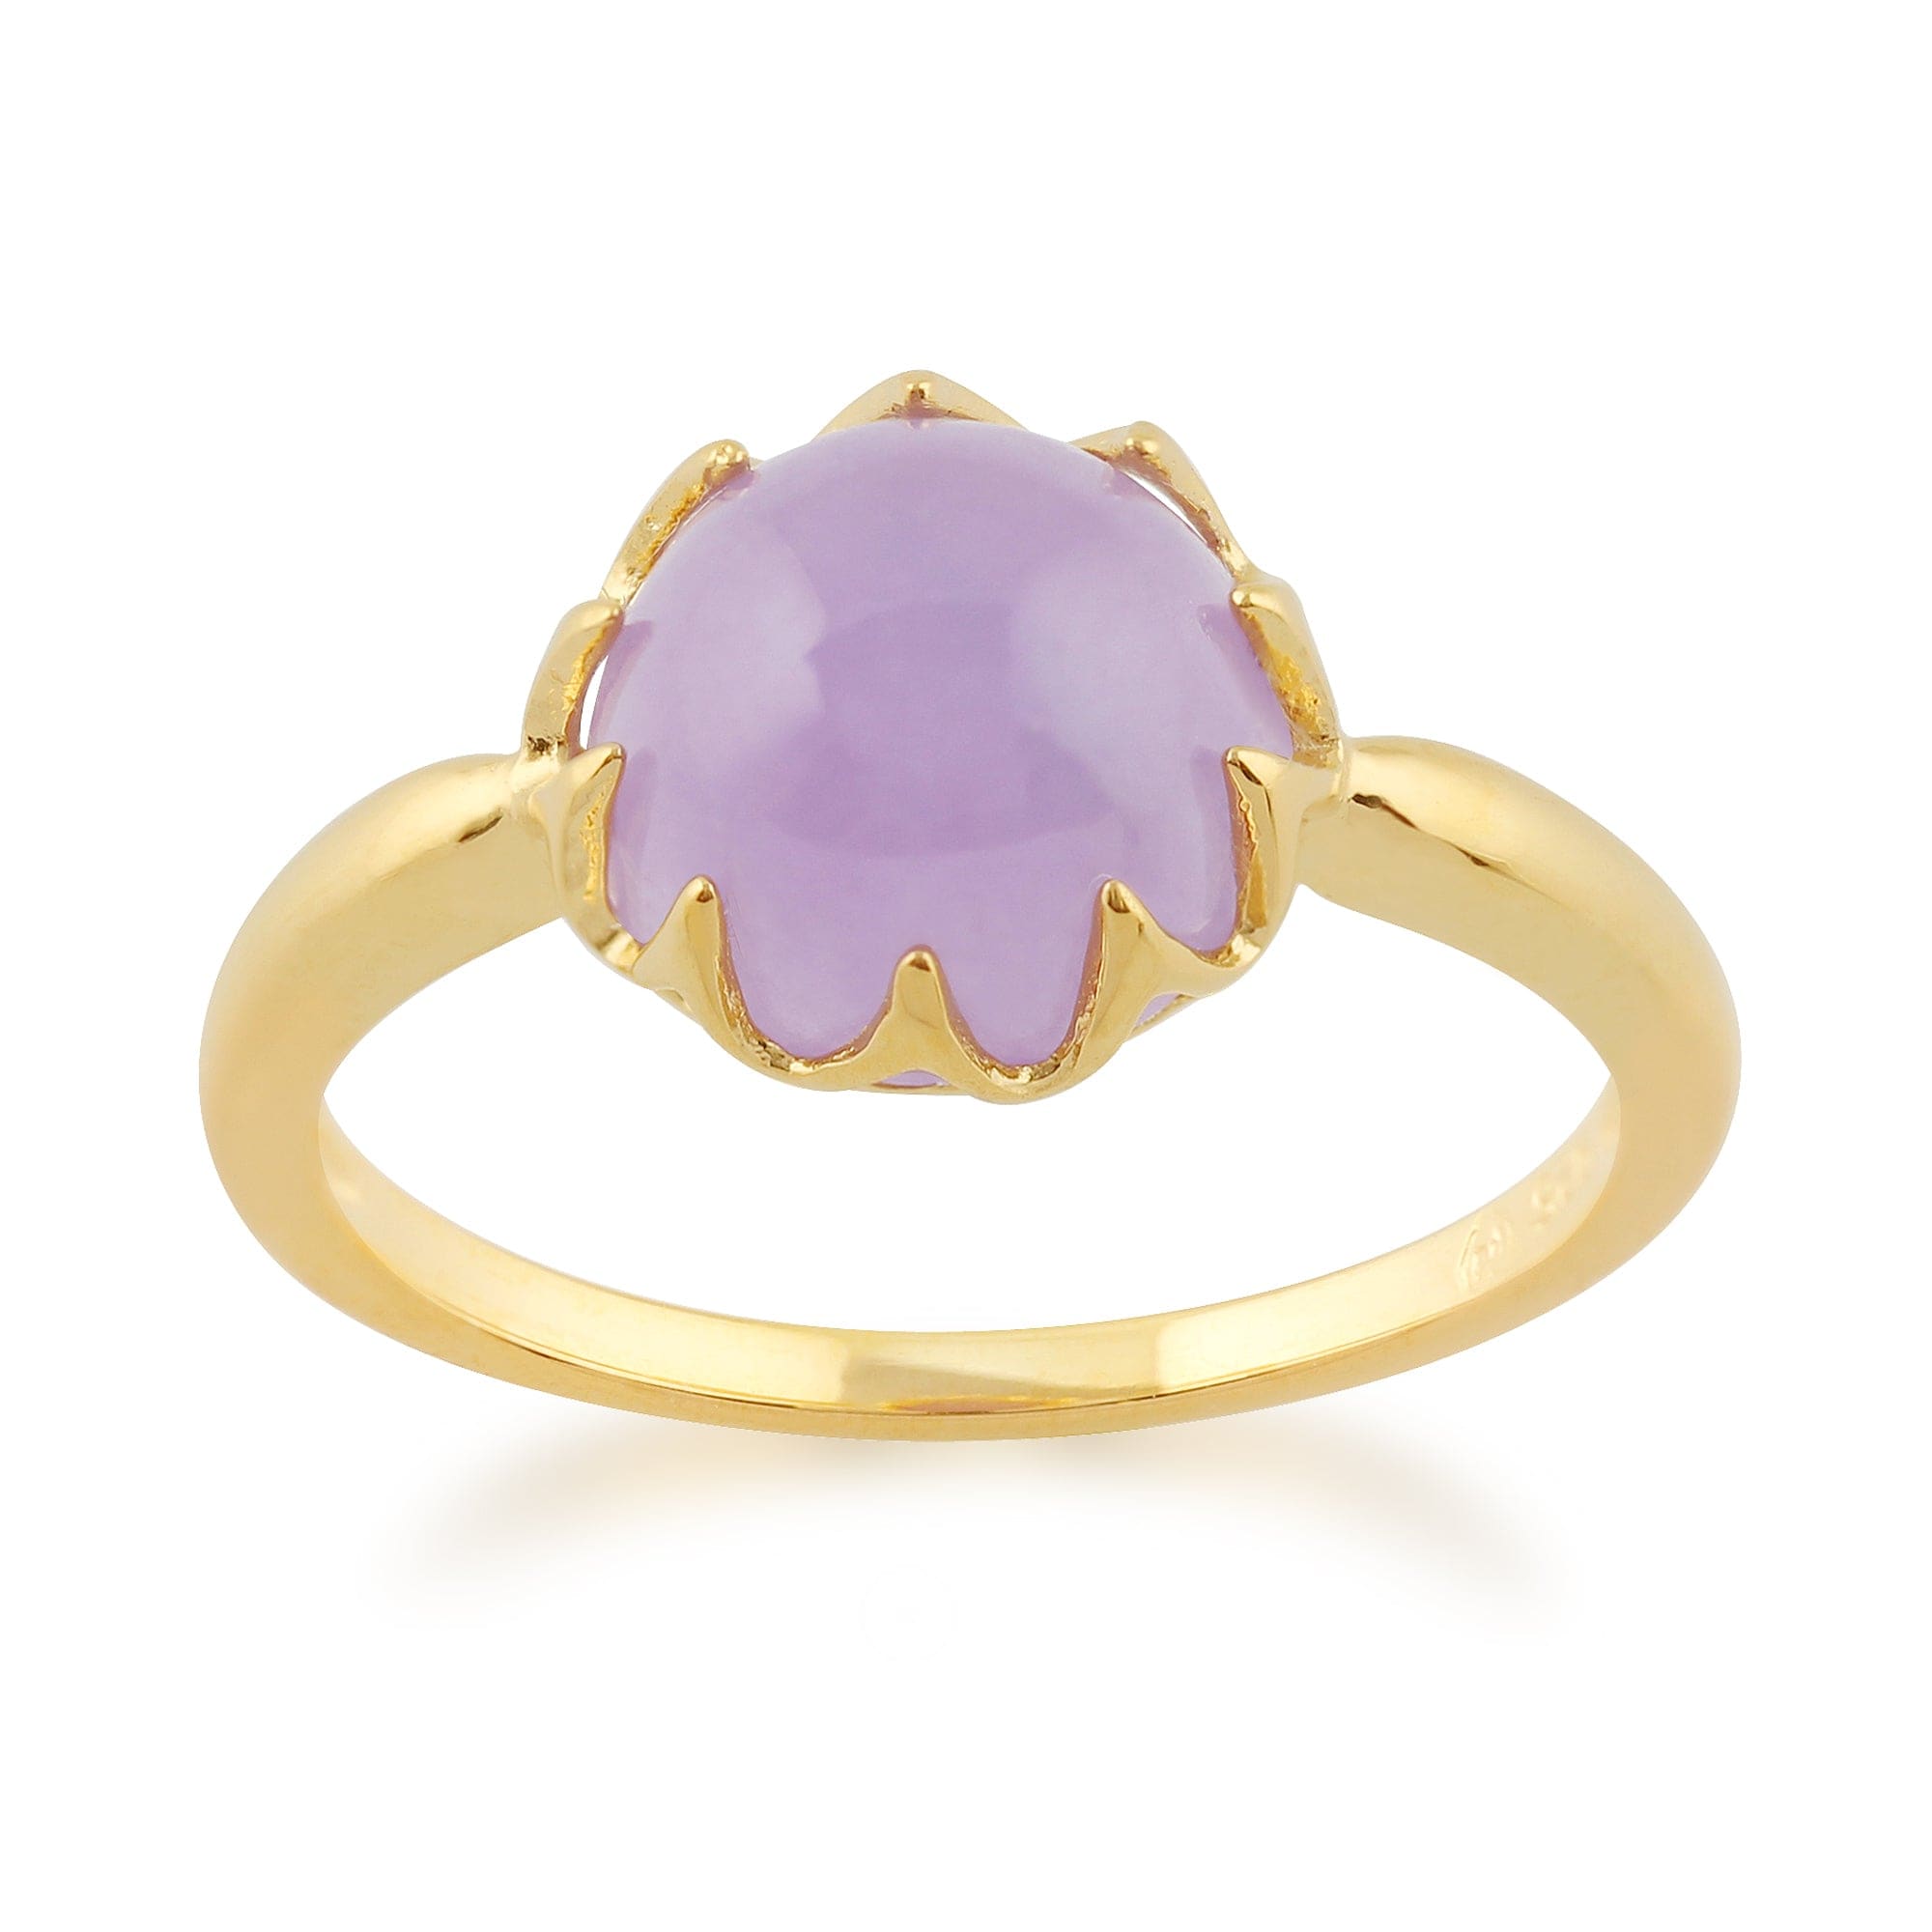 Lavender Jade 'Calo' Pastel Ring in 9ct Yellow Gold Plated Sterling Silver  Image 1